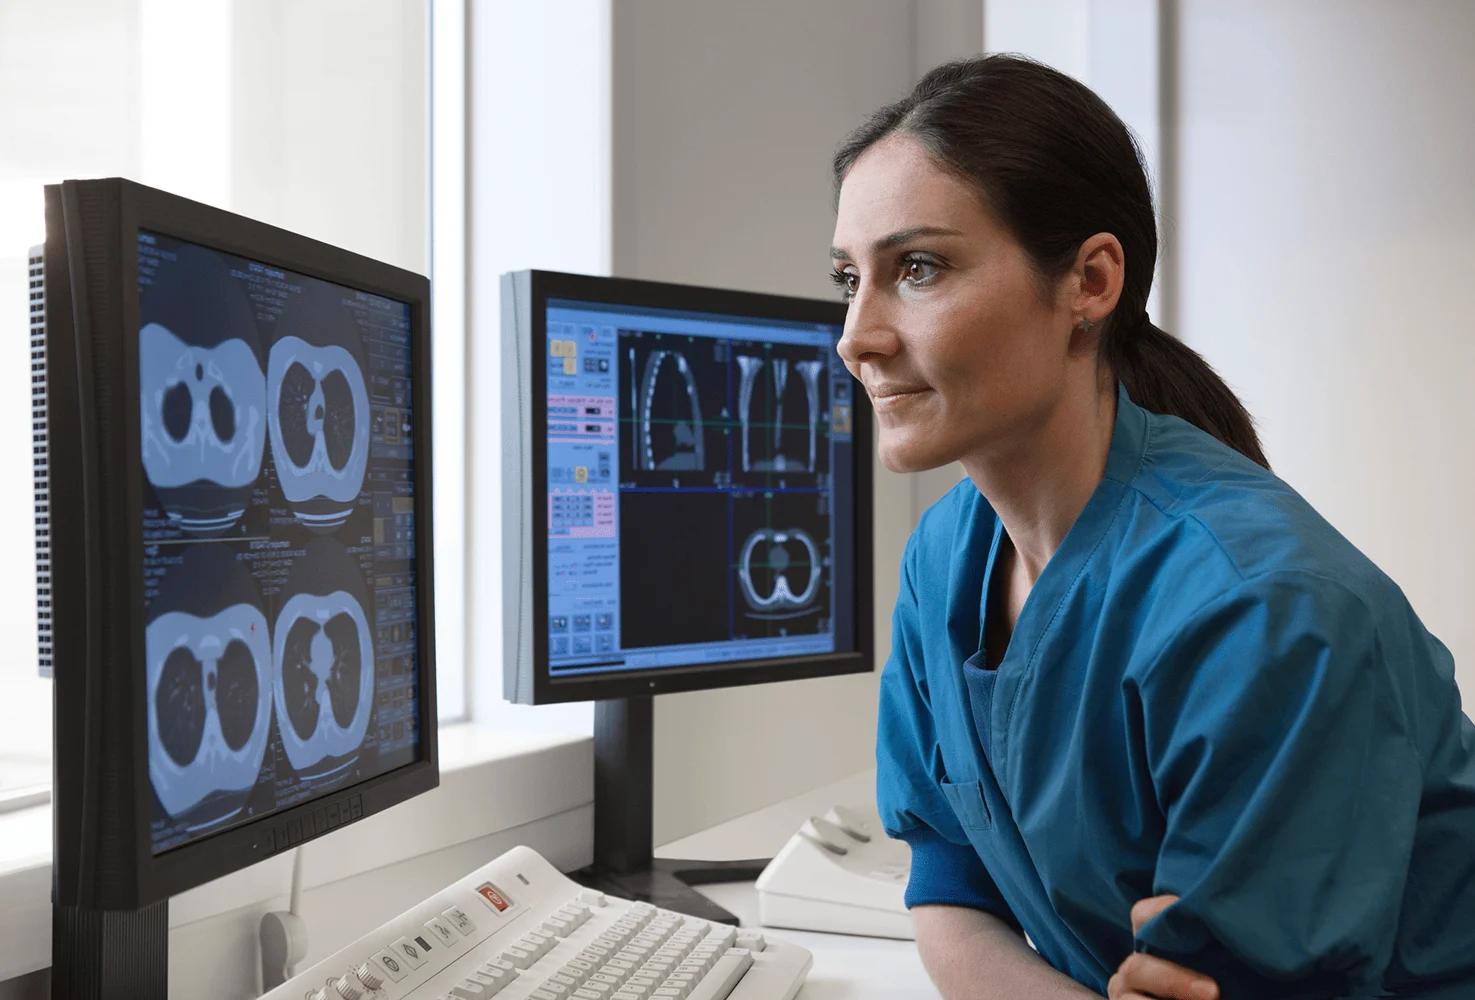 Radiologist reviewing scans on screens